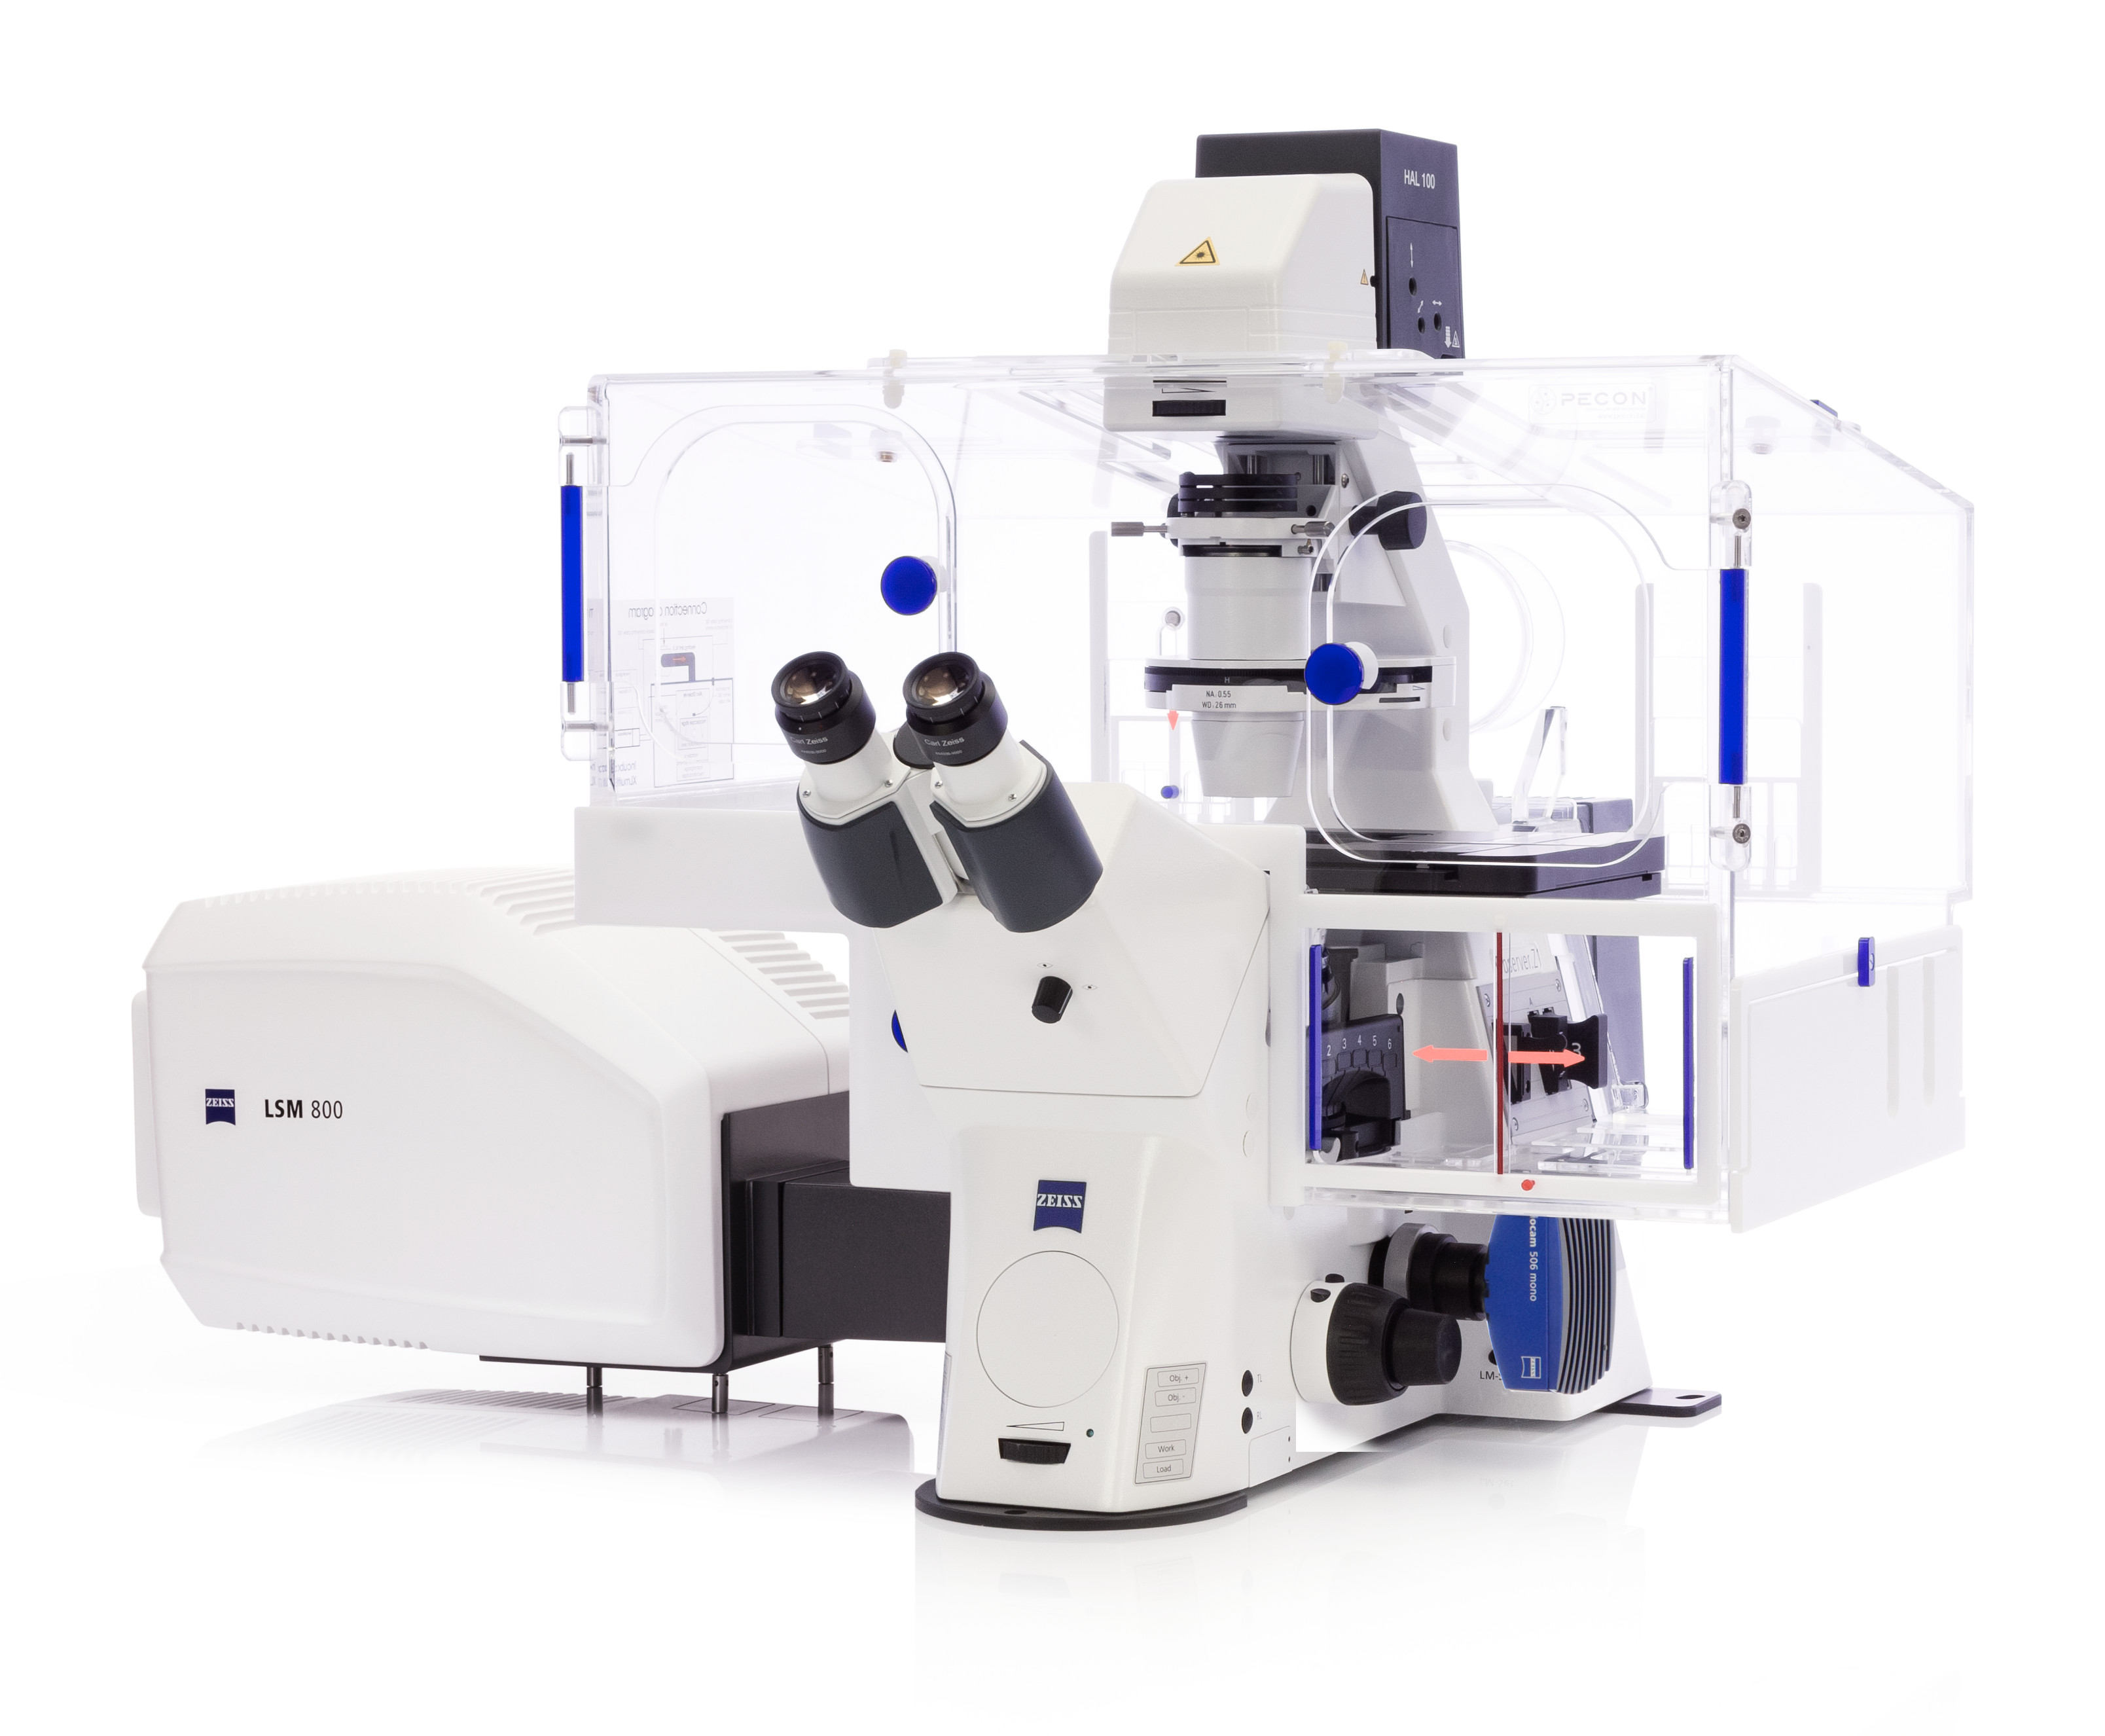 ZEISS LSM 800 with Airyscan- Your Compact Confocal Power Pack (15698675523)